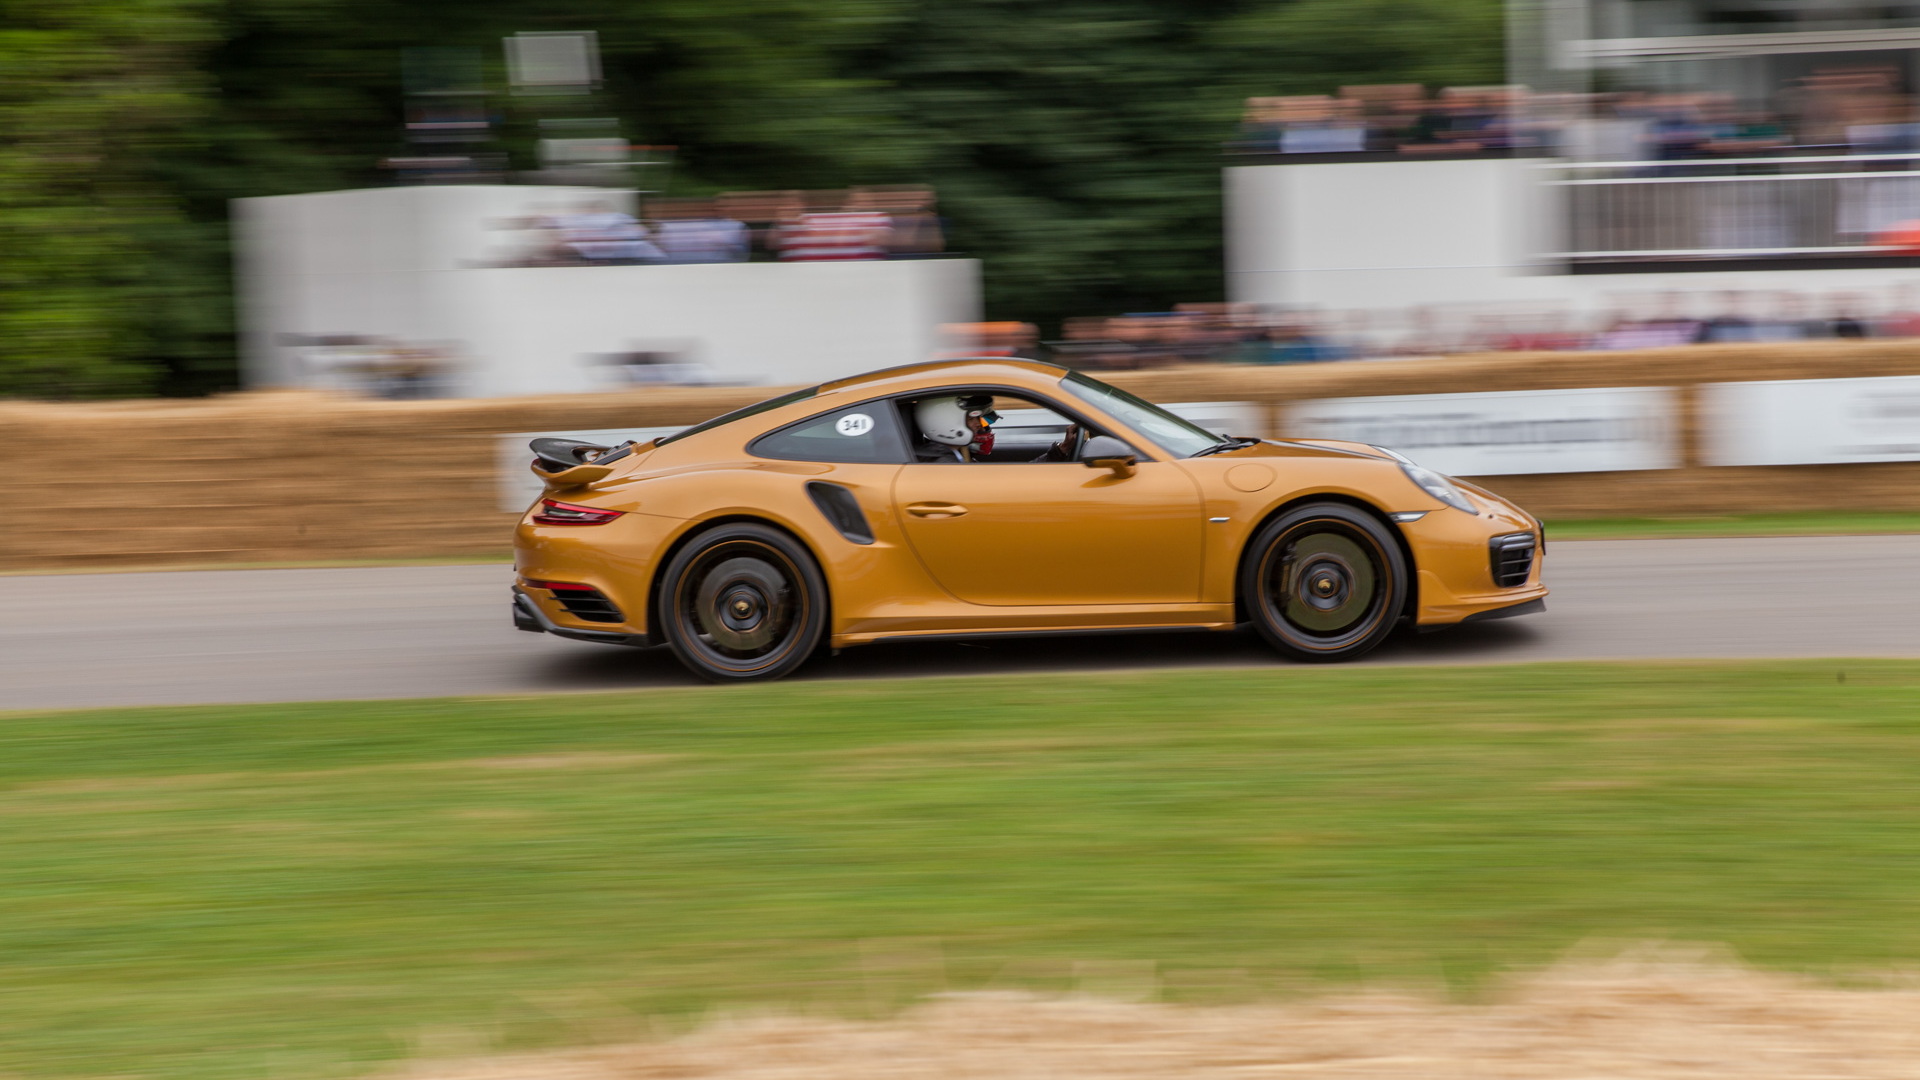 2017 Goodwood Festival of Speed-Day 1